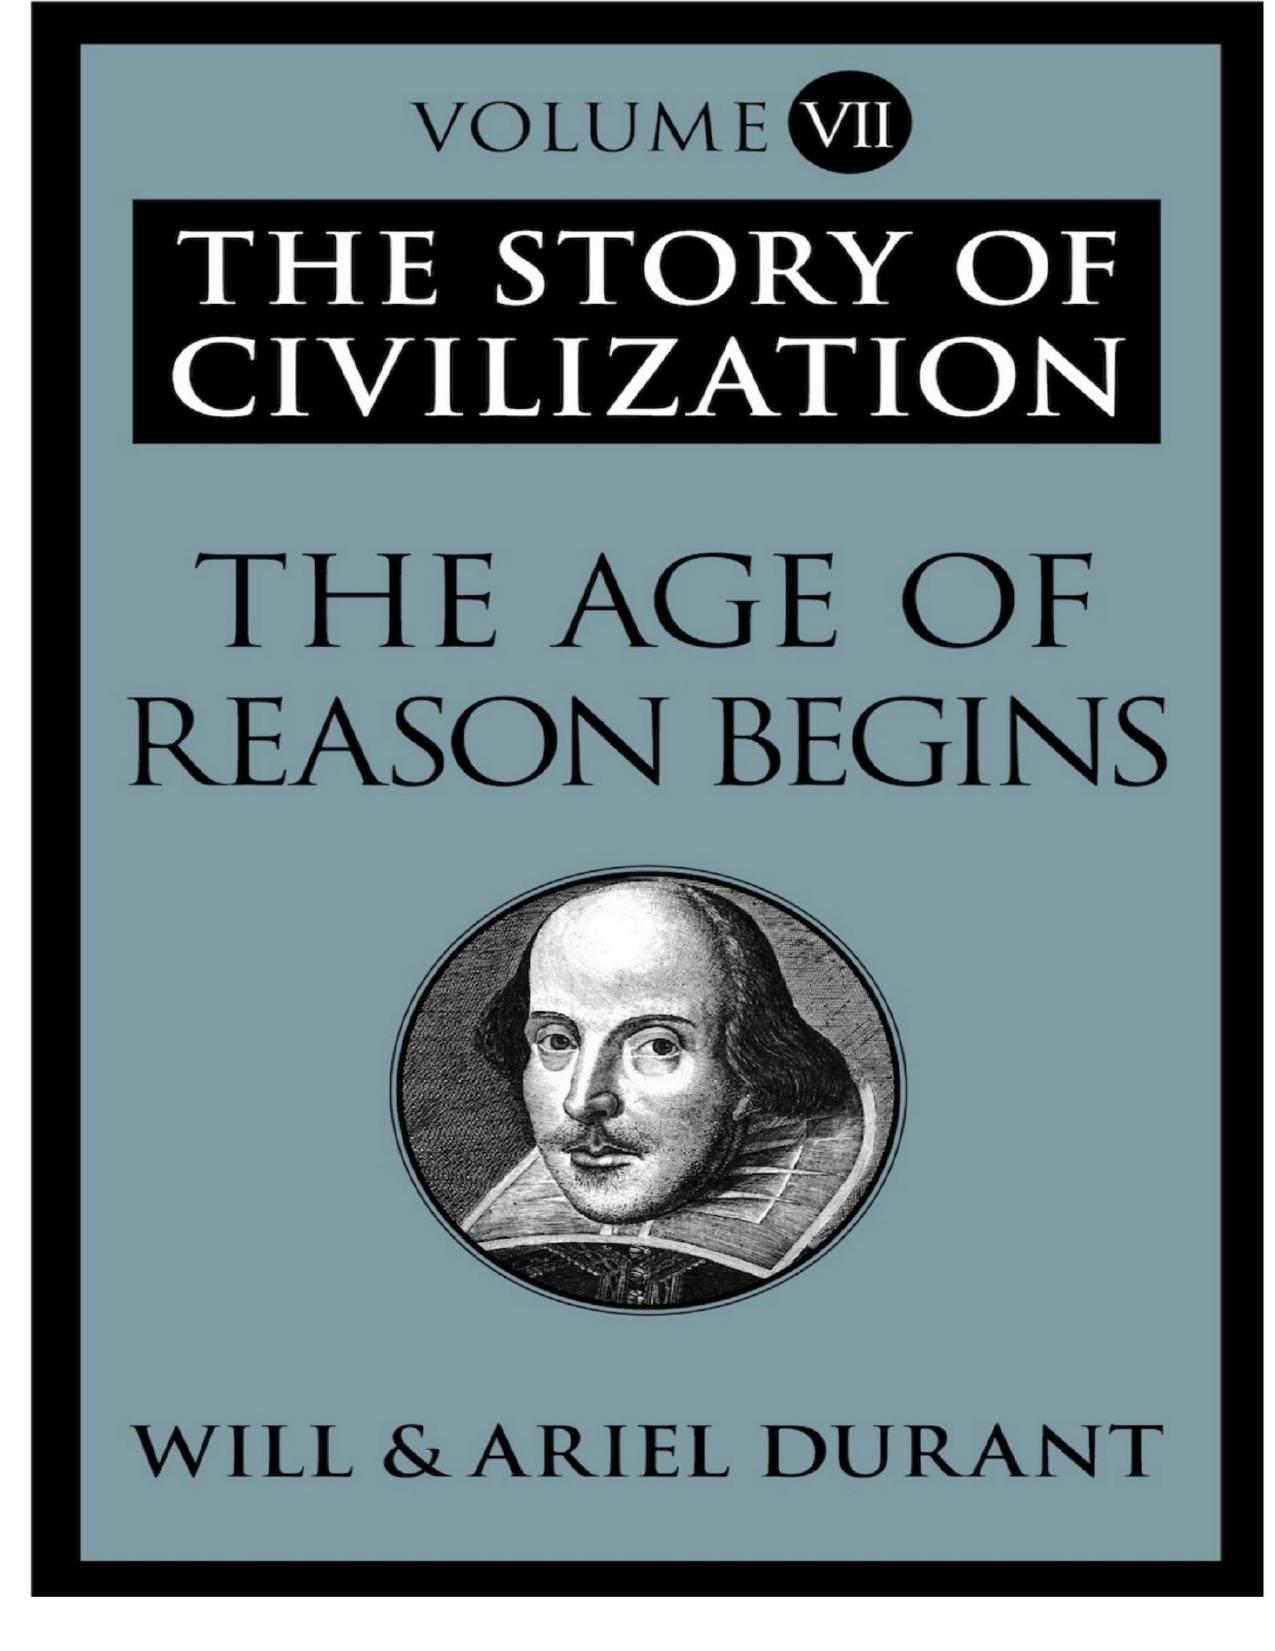 The Age of Reason Begins: The Story of Civilization by Will Durant